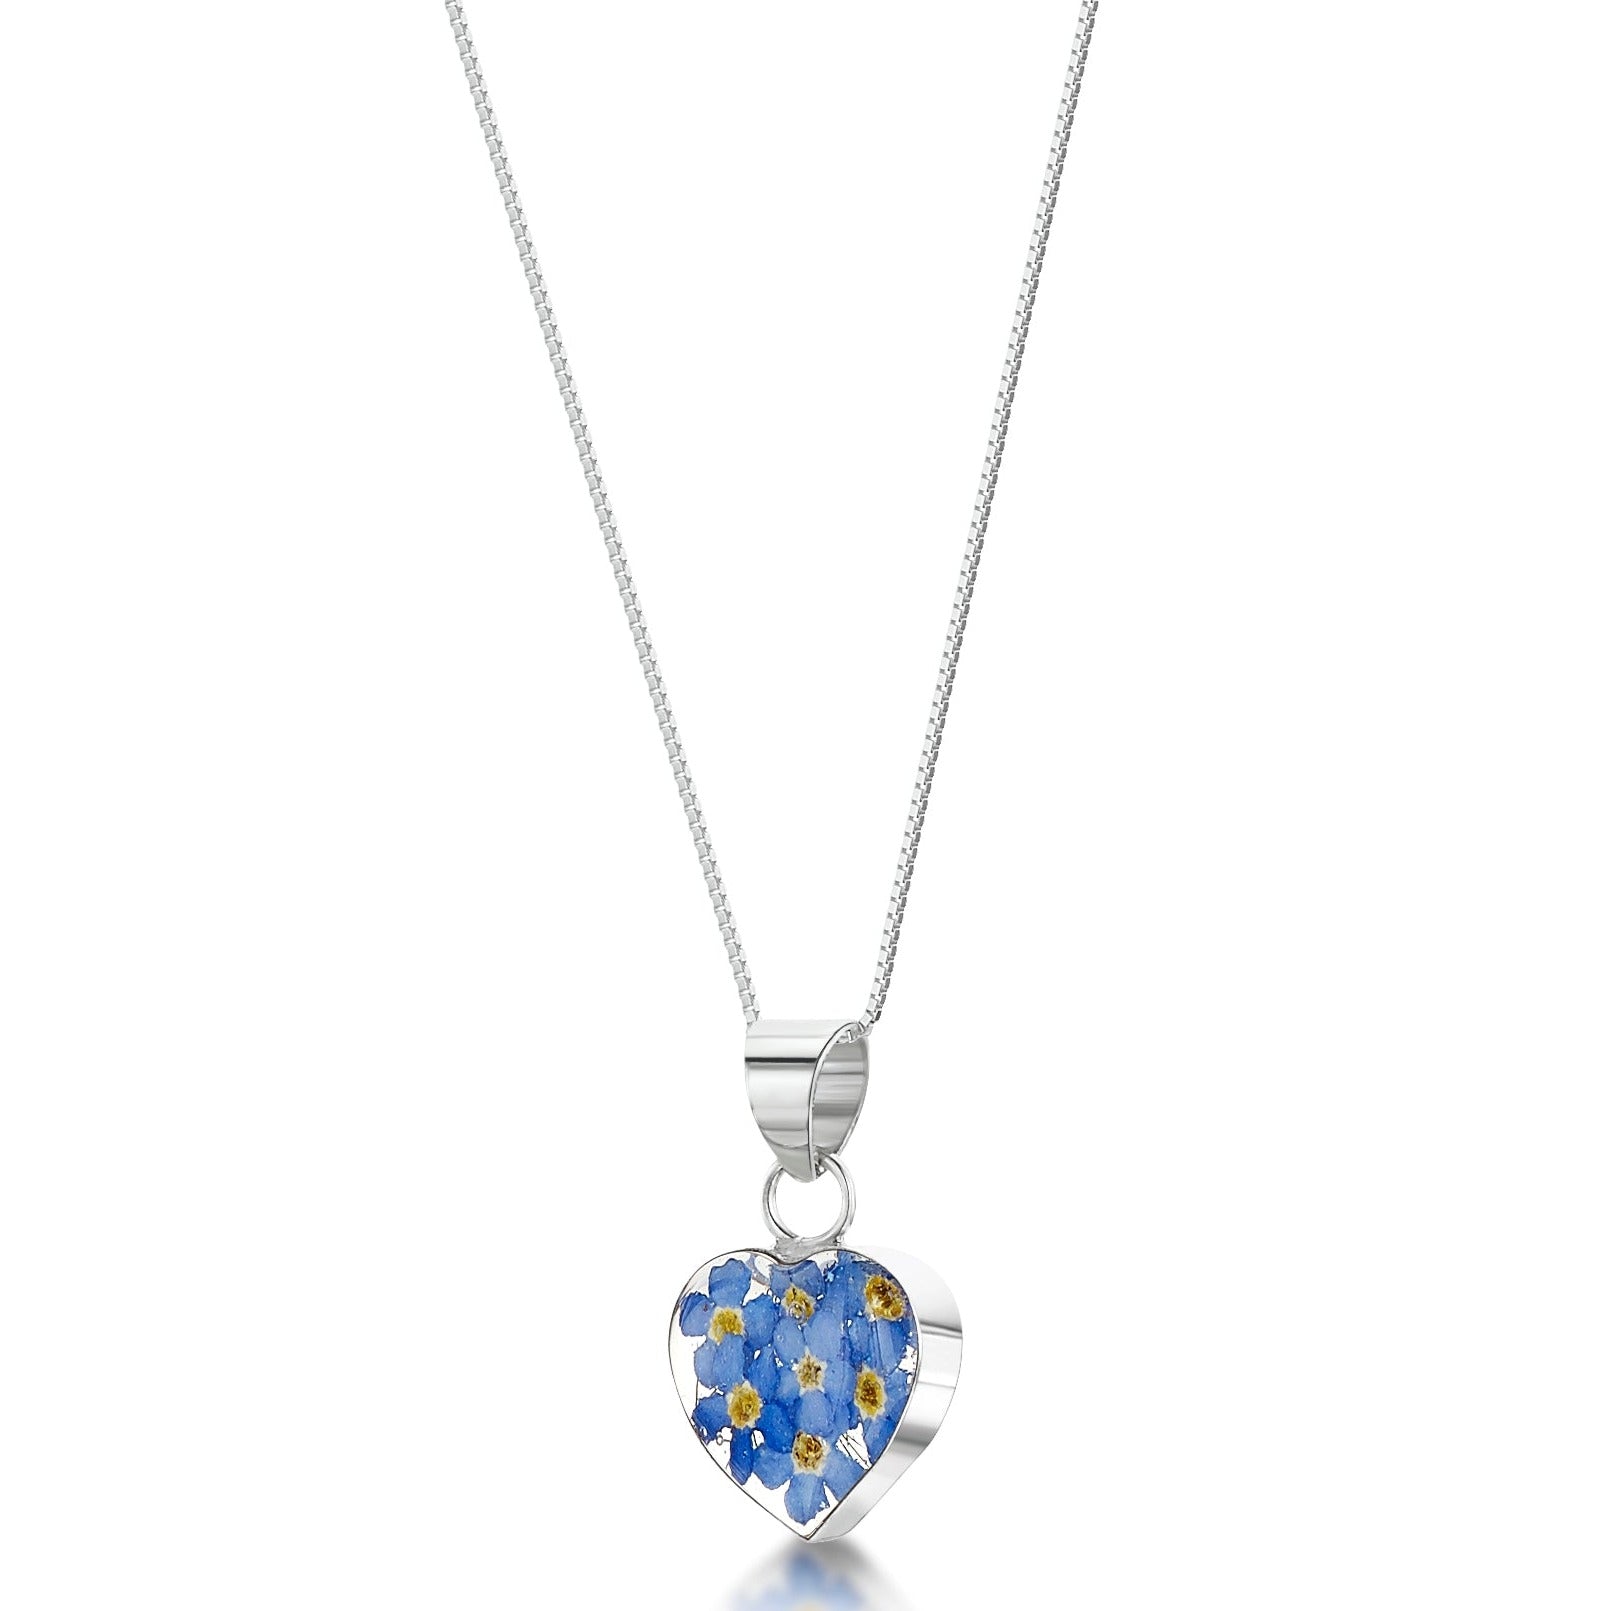 Sterling silver heart-shaped pendant with real forget-me-not flowers set in resin. Hangs on an adjustable 18 inch sterling silver chain.